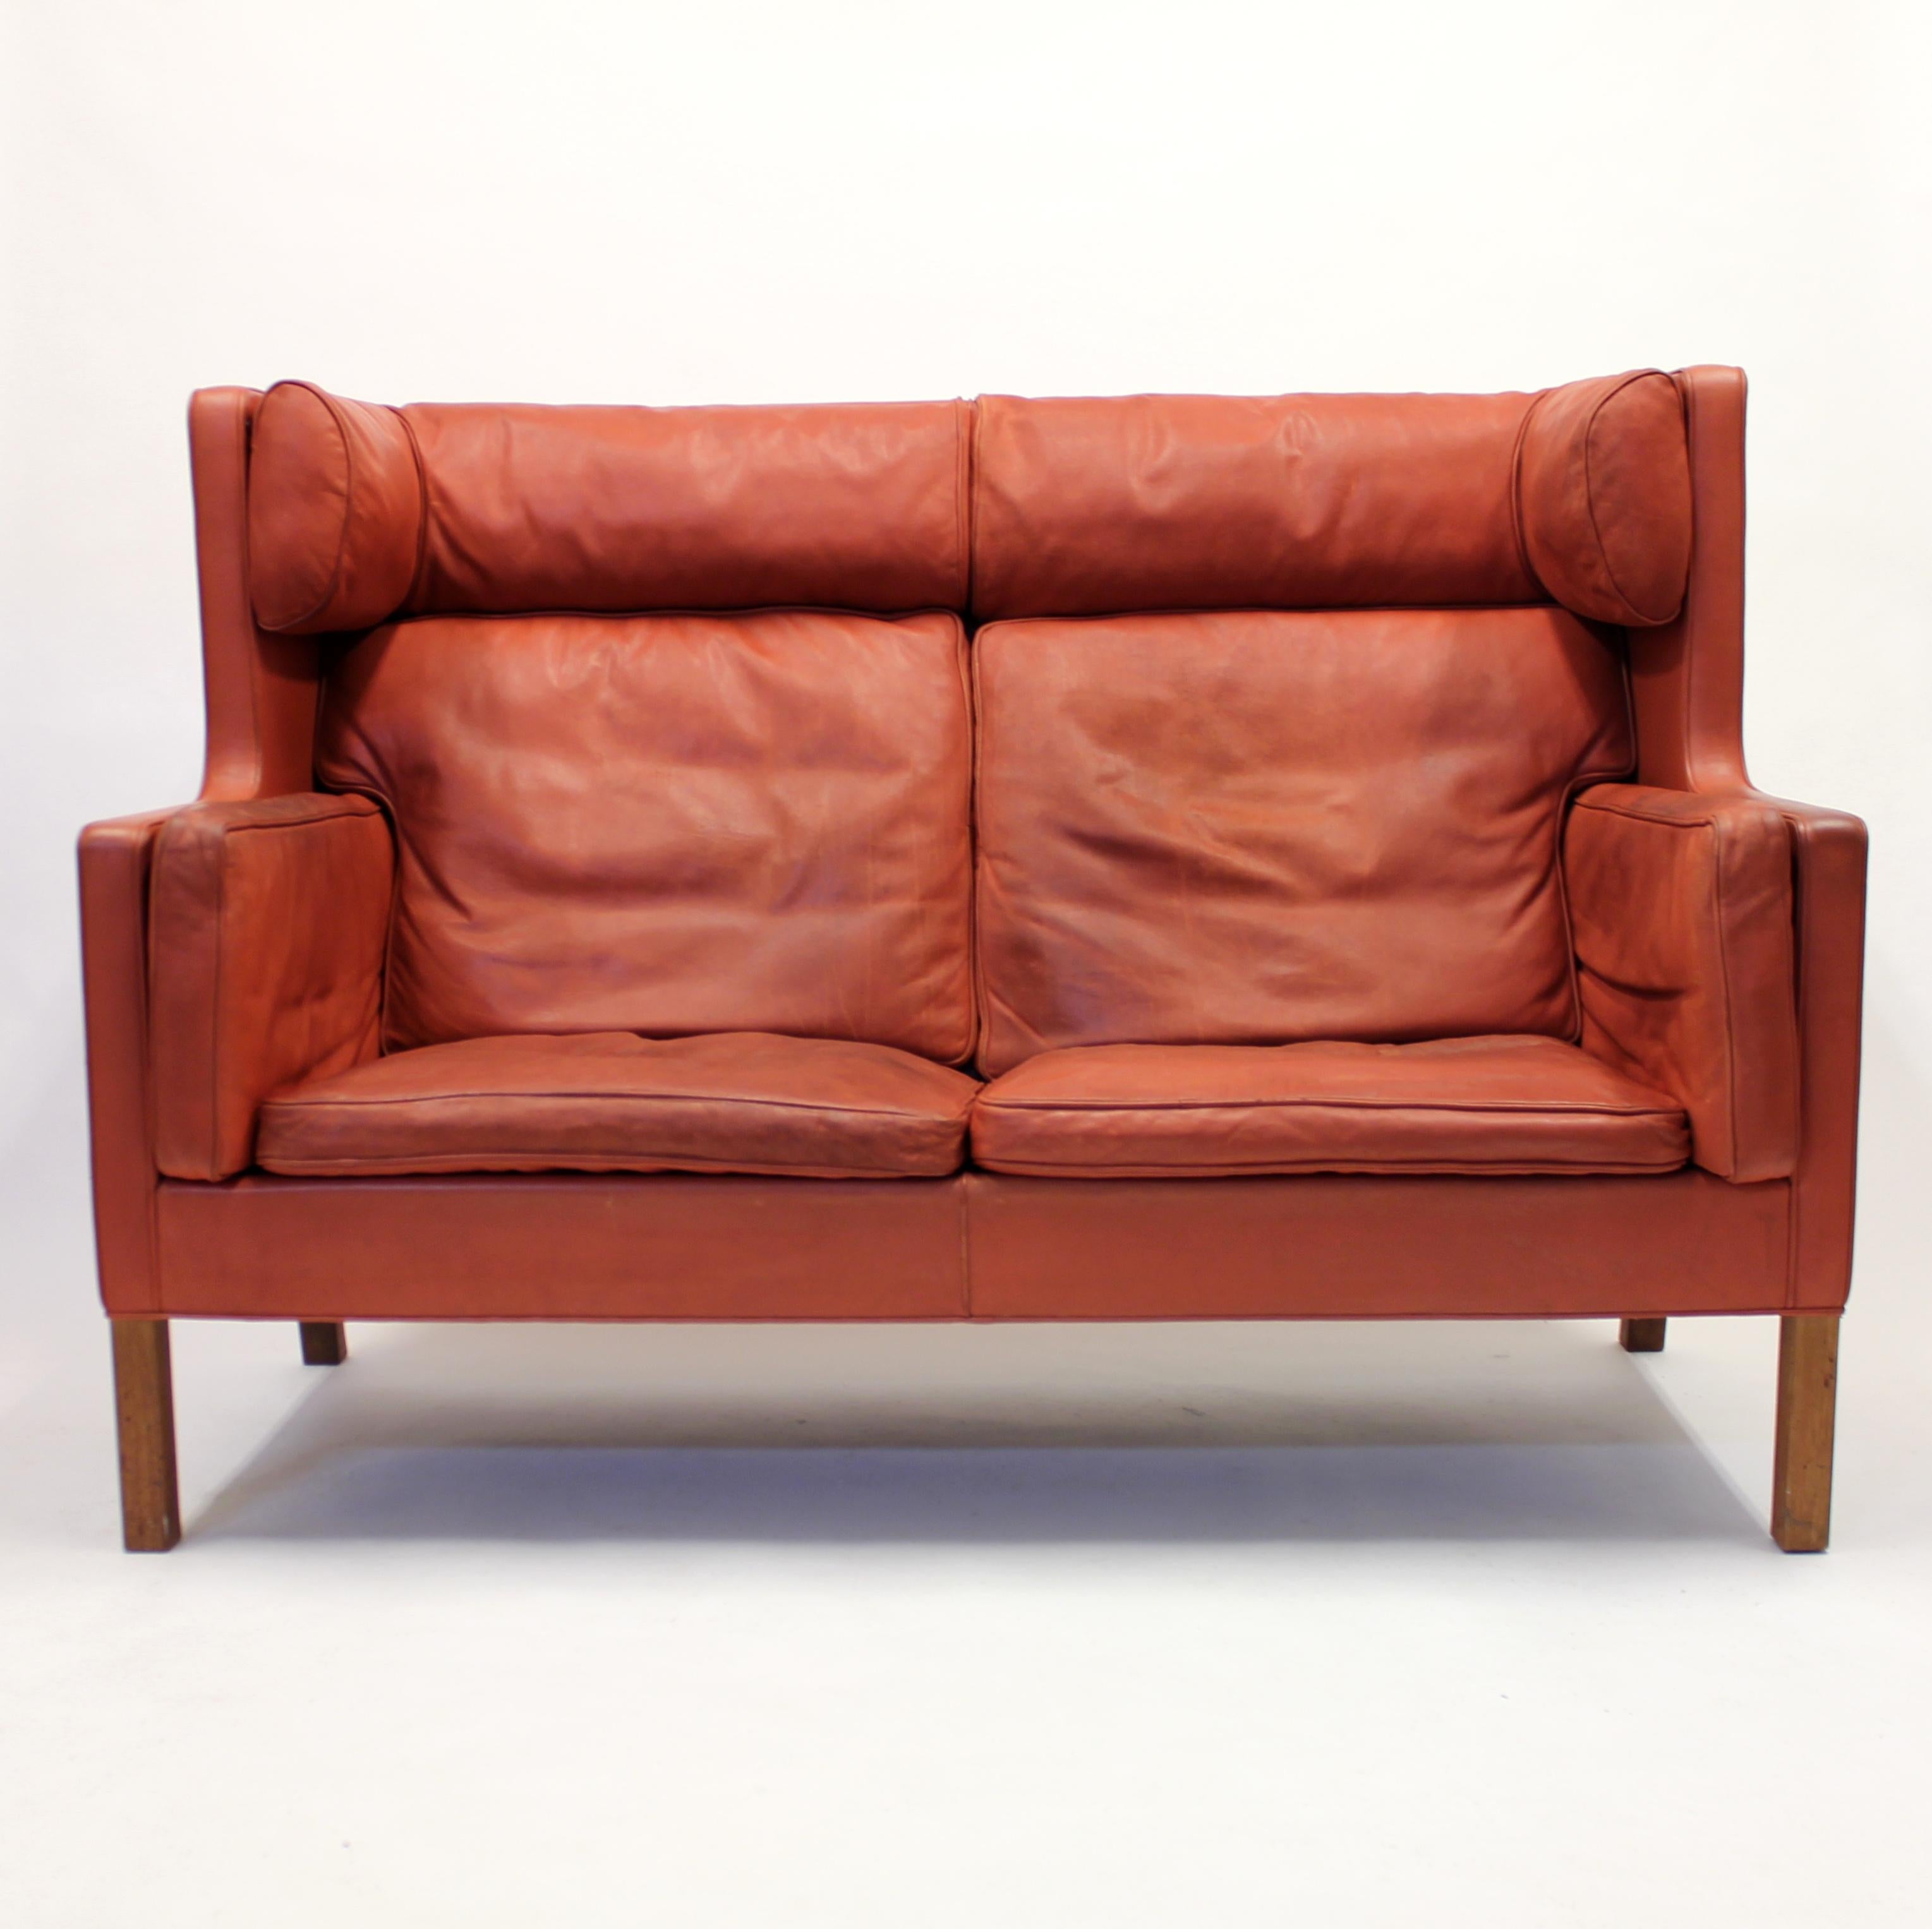 Danish Børge Mogensen, Coupe Leather Sofa 2192, for Frederica, 1980s